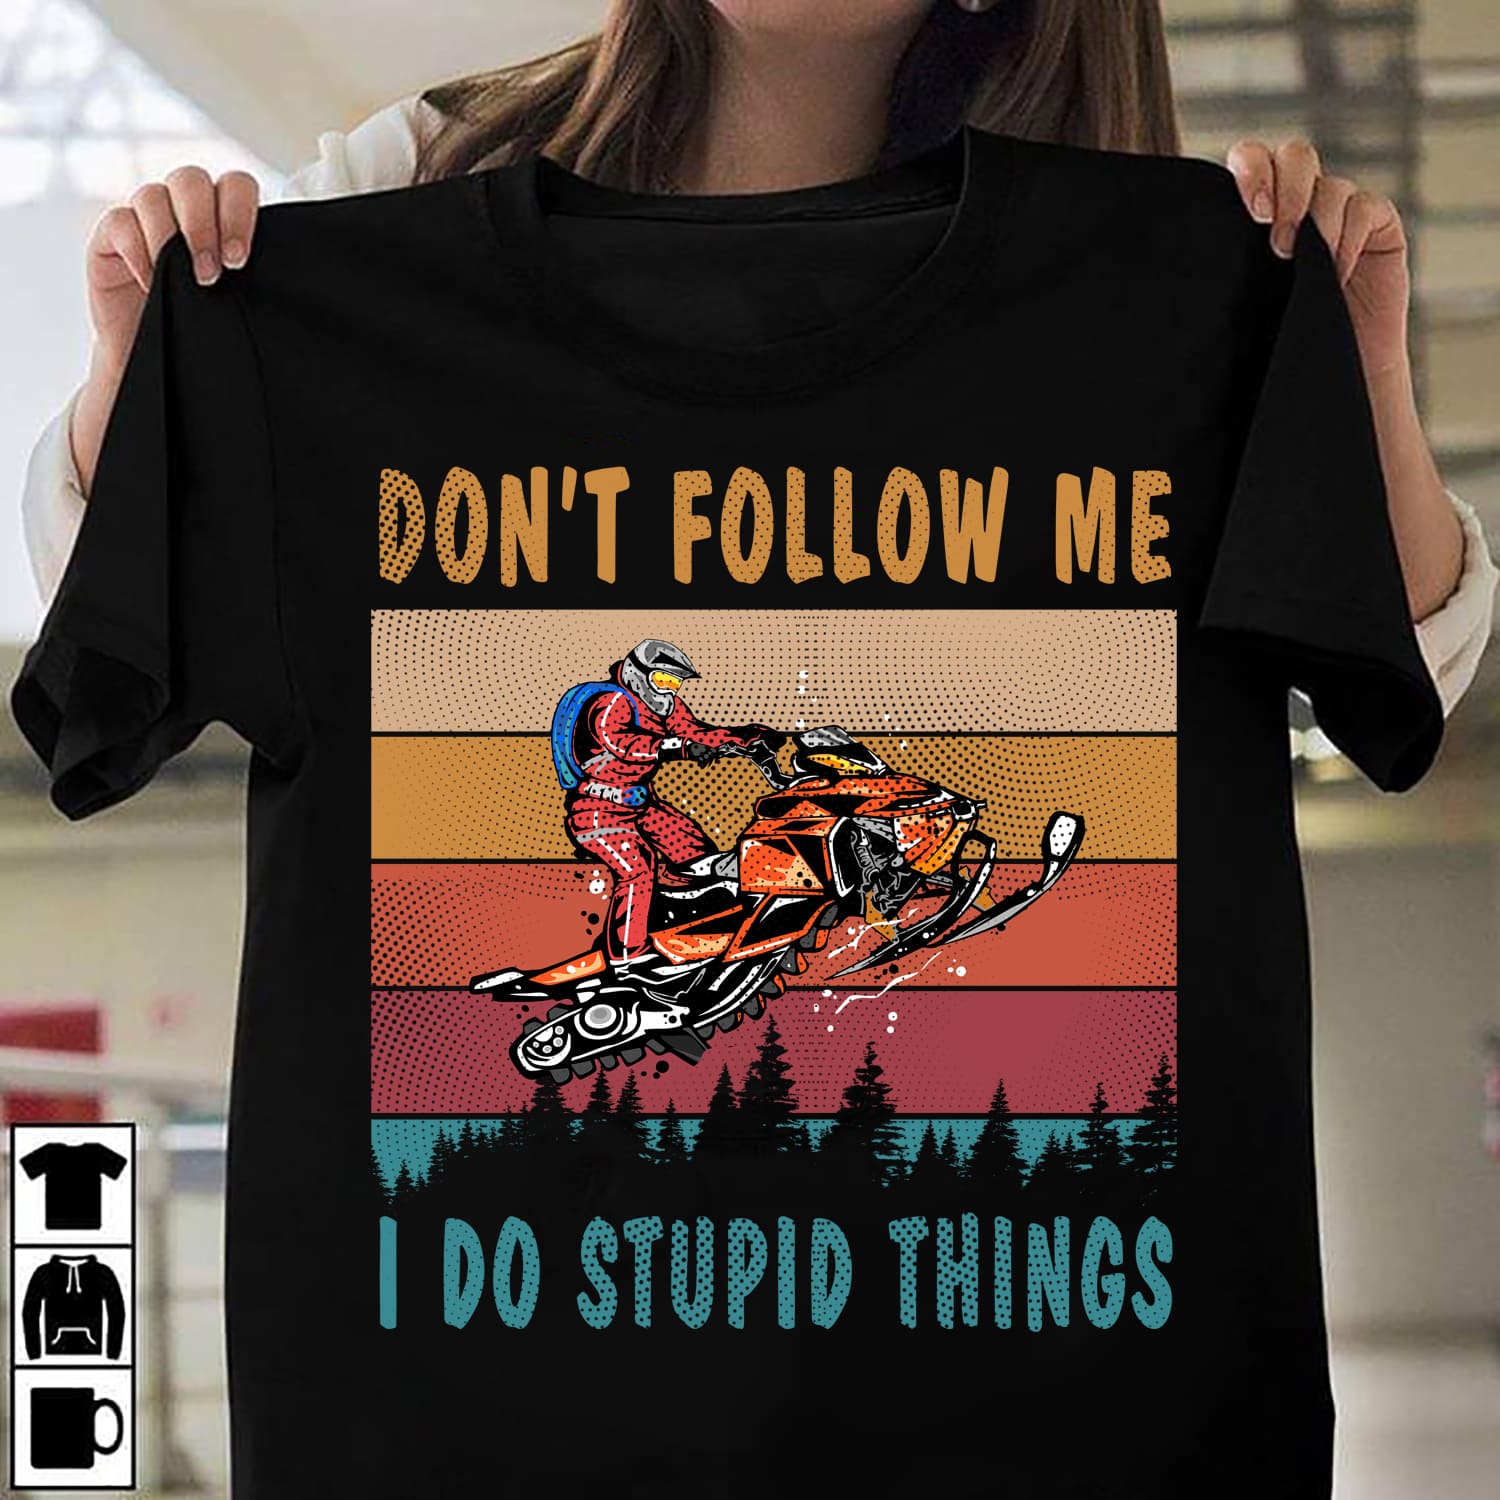 Don't follow me I do stupid things - Man riding snowmobile, love go snowmobiling